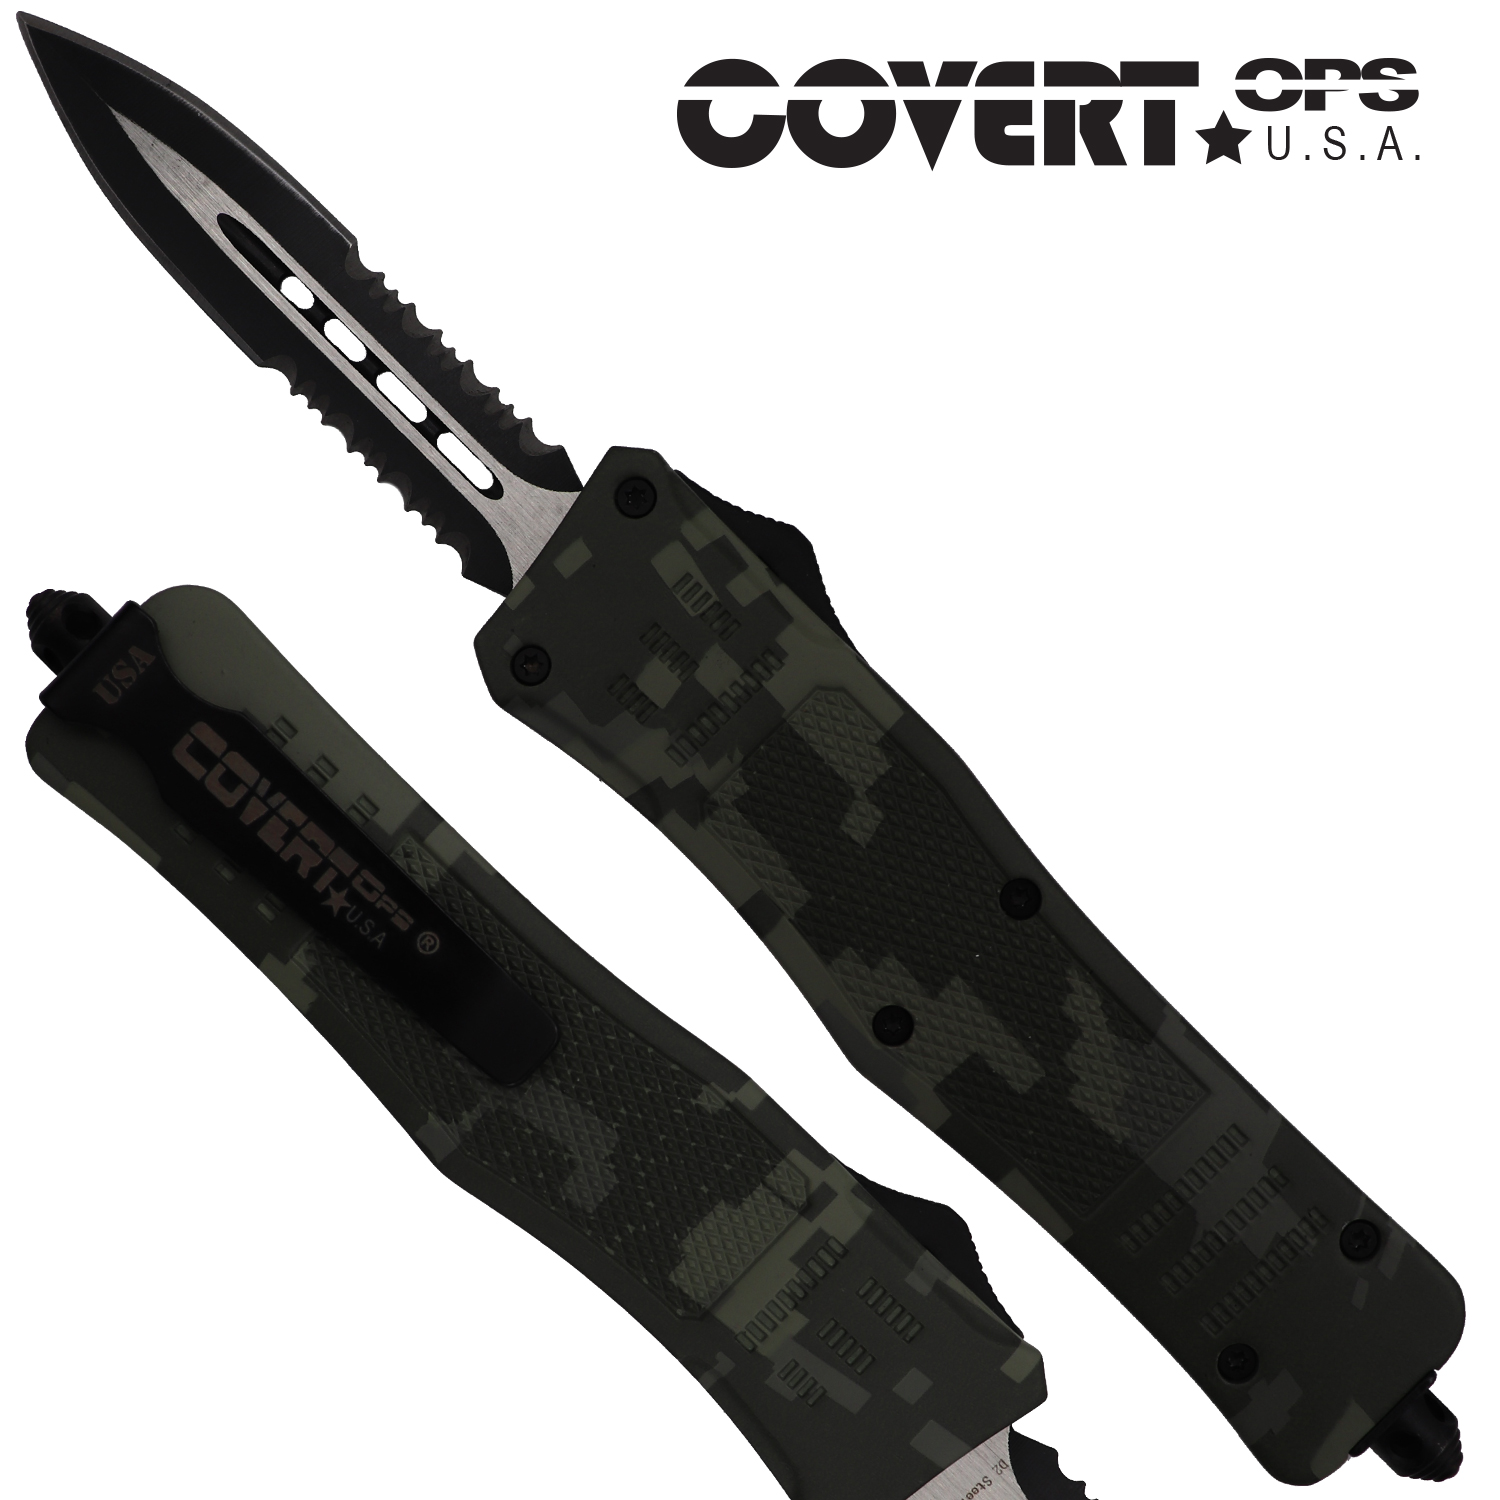 Covert OPS USA OTF Automatic Knife 8 inch overall Digital Camo Handle Two Tone Double Edge D2 Steel Blade